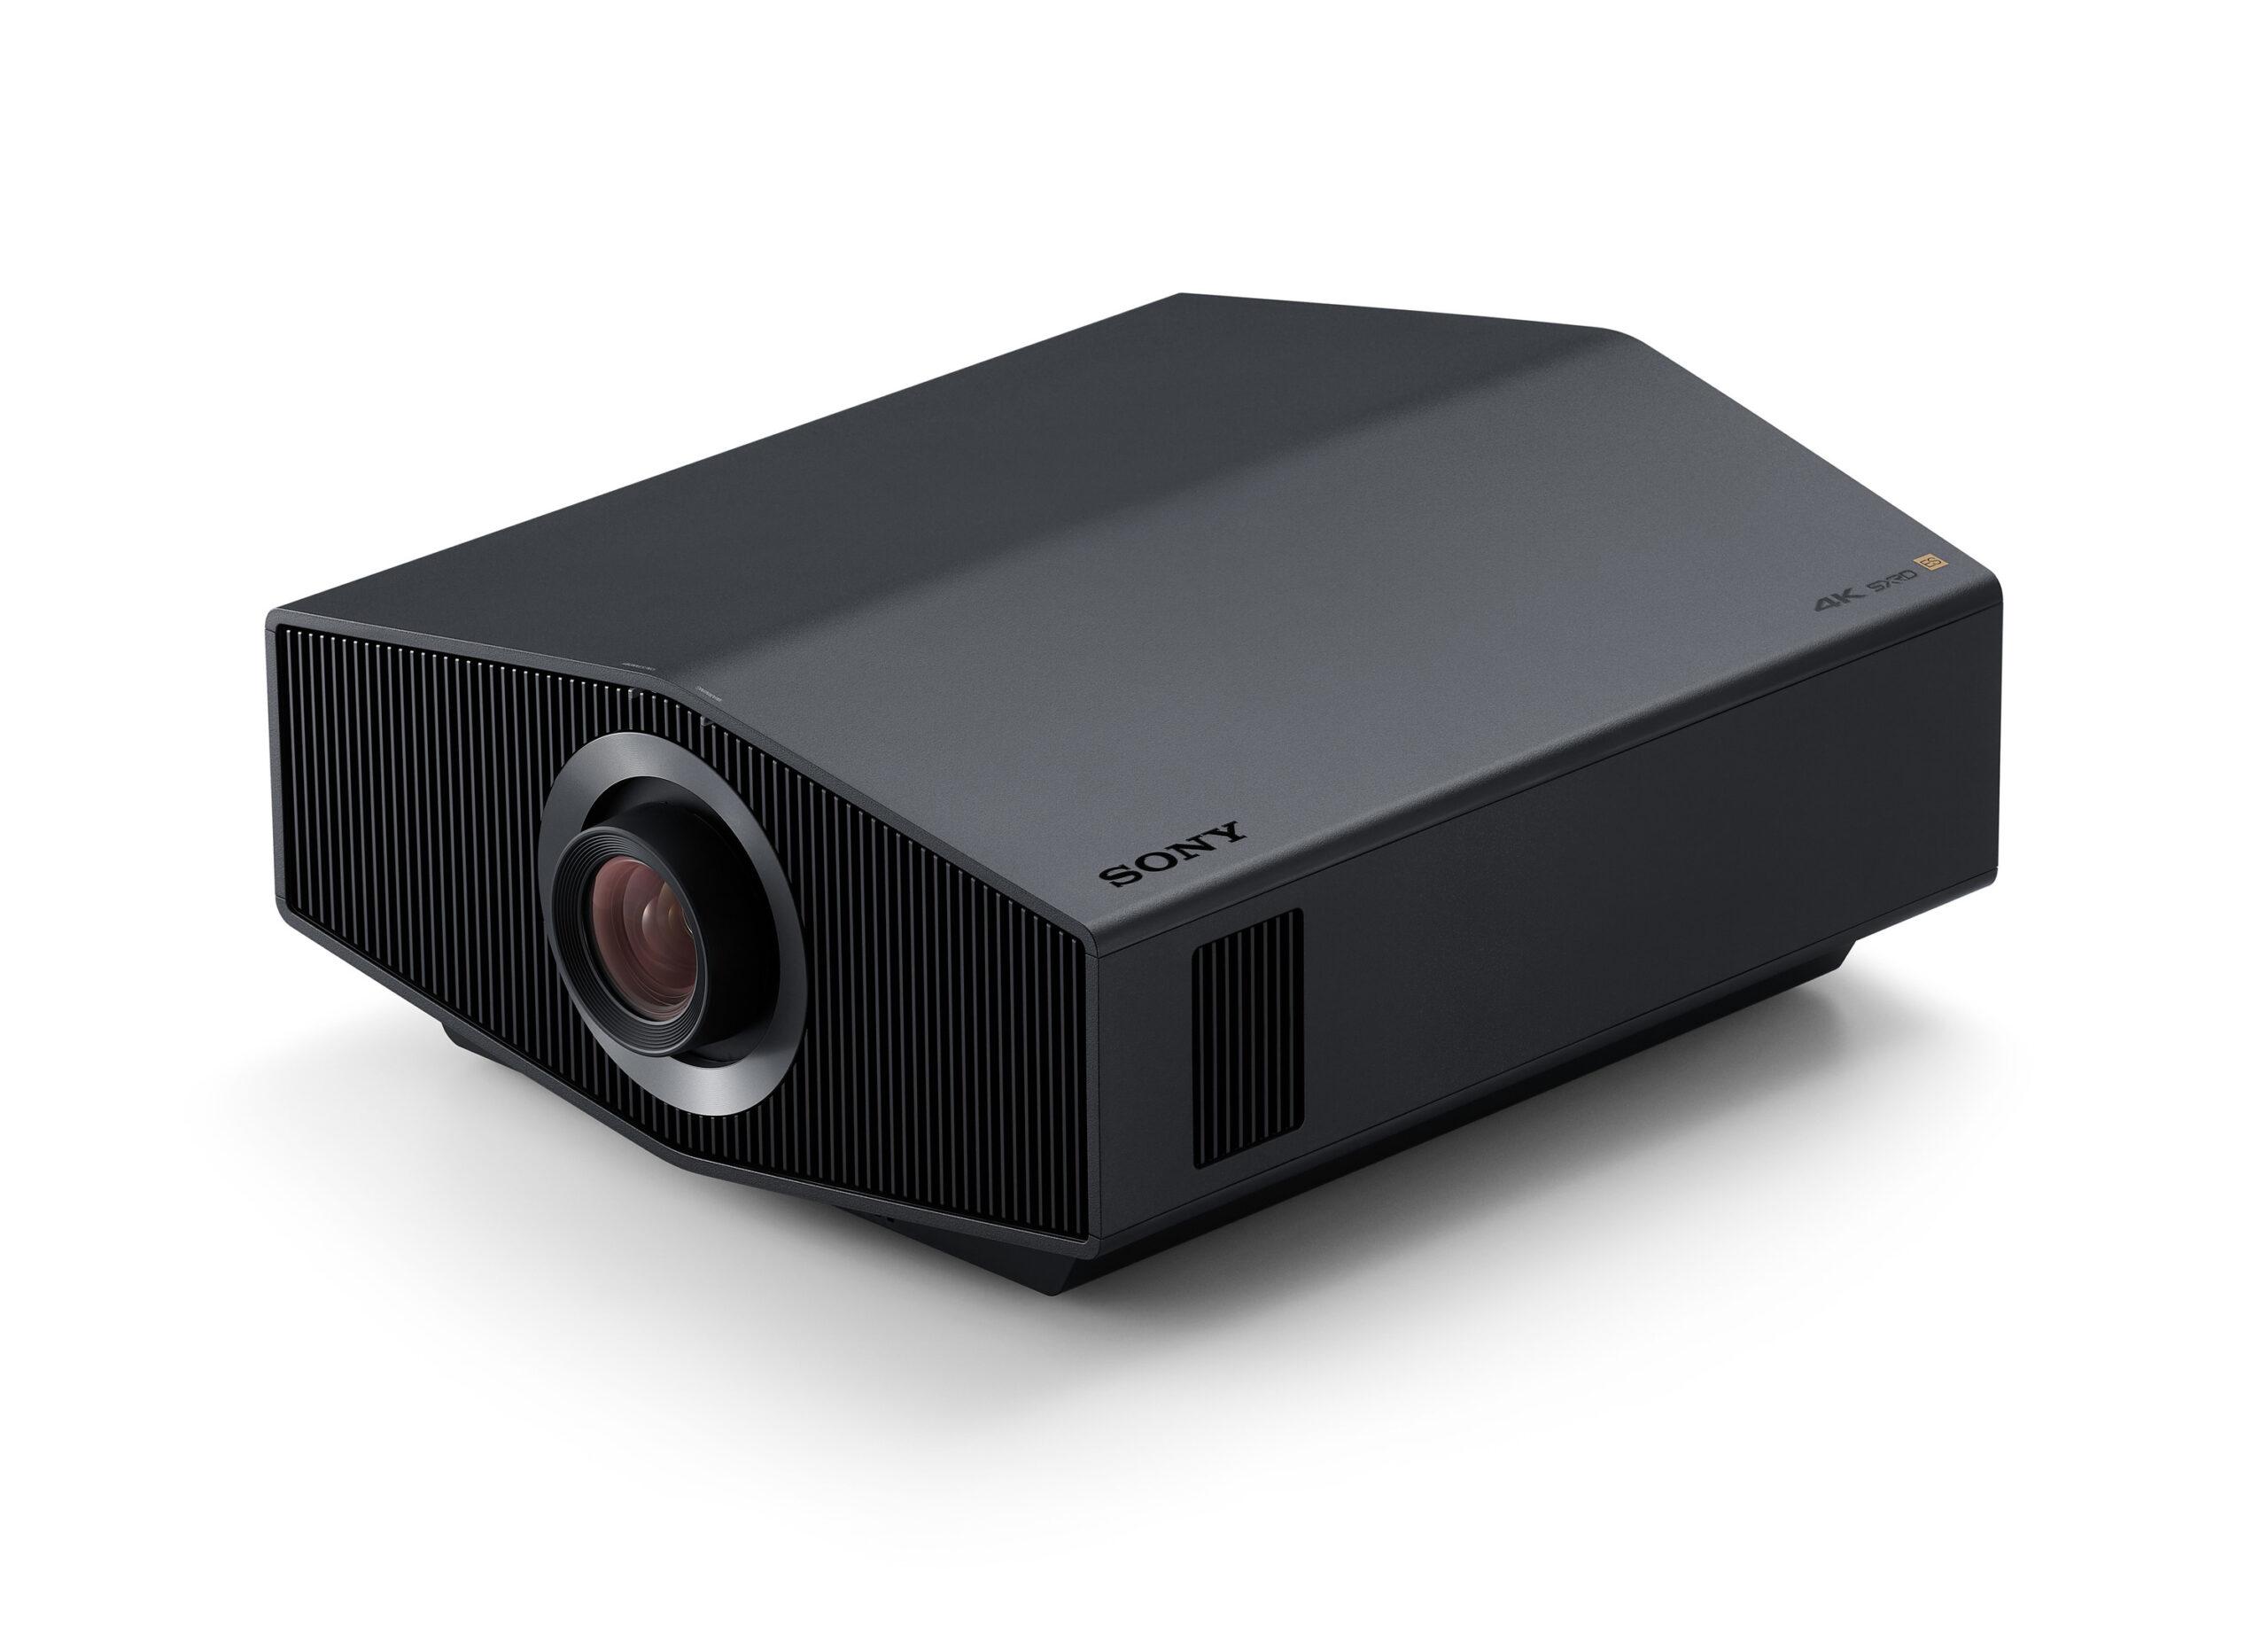 This is no mere annual refresh. Sony's three new home theater projectors are a generational leap forward. bb2e0d32 vplxw7000 others 220201 07 large scaled